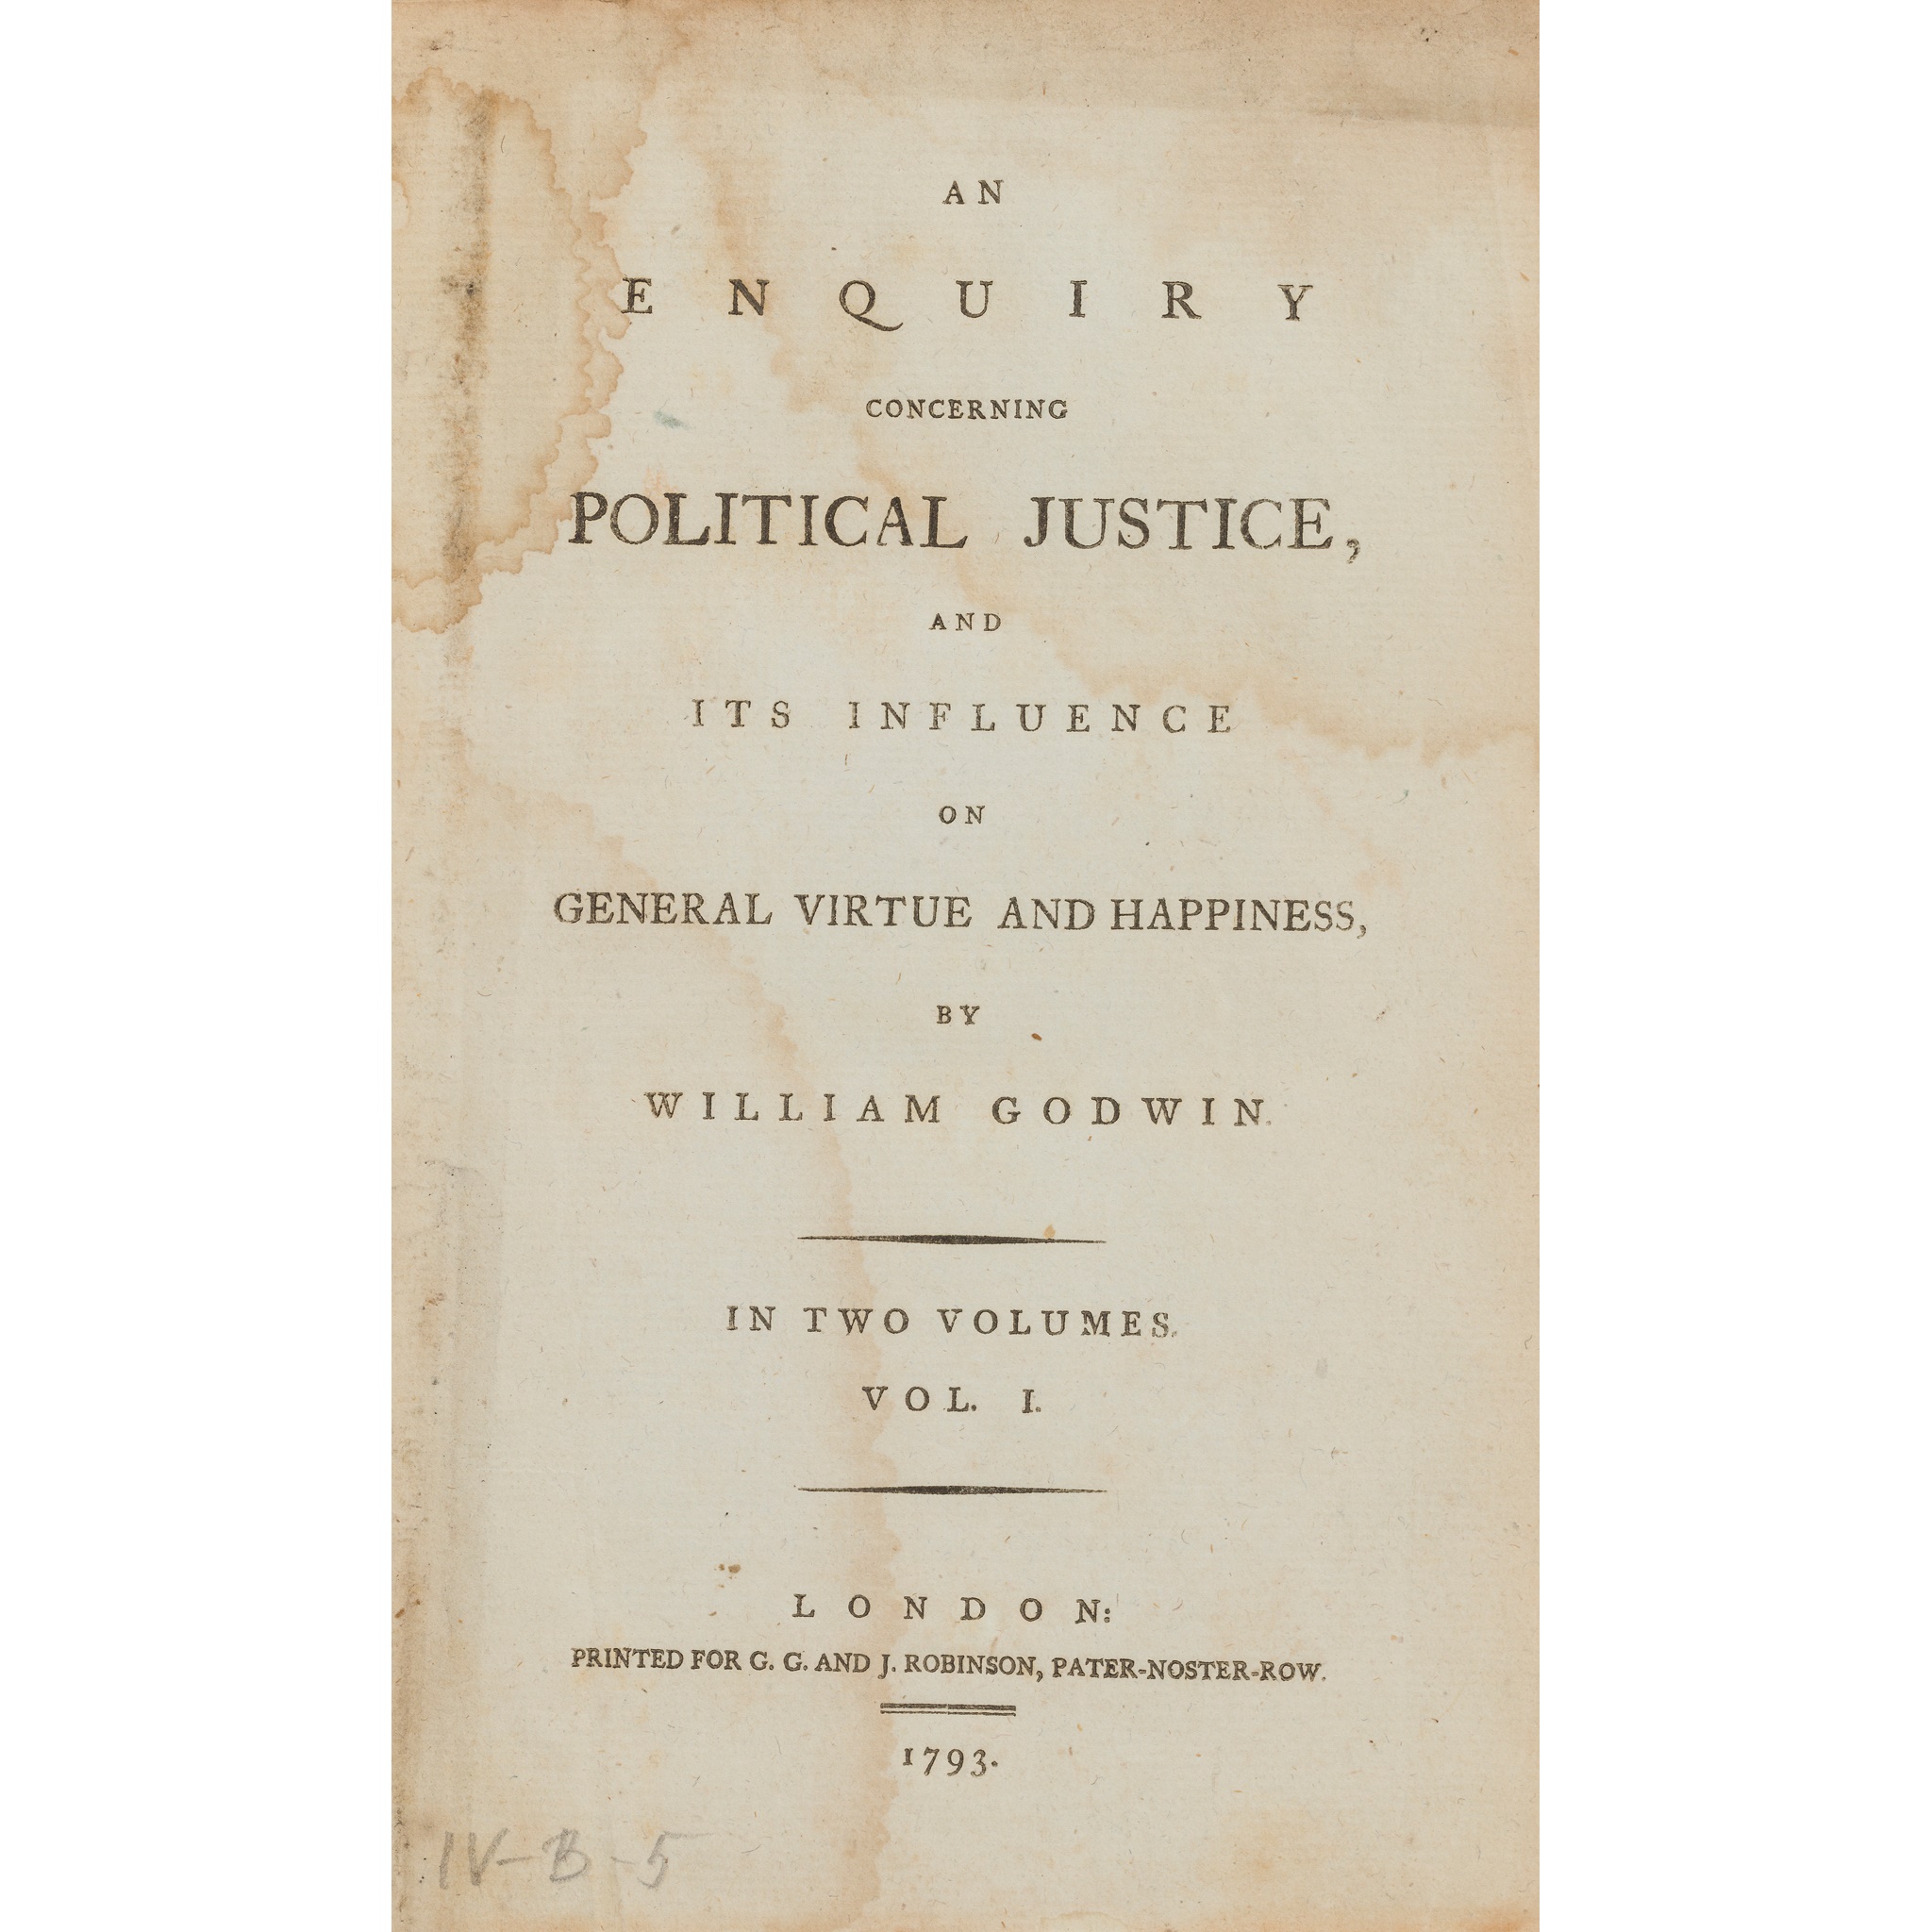 Godwin, William An Enquiry concerning Political Justice